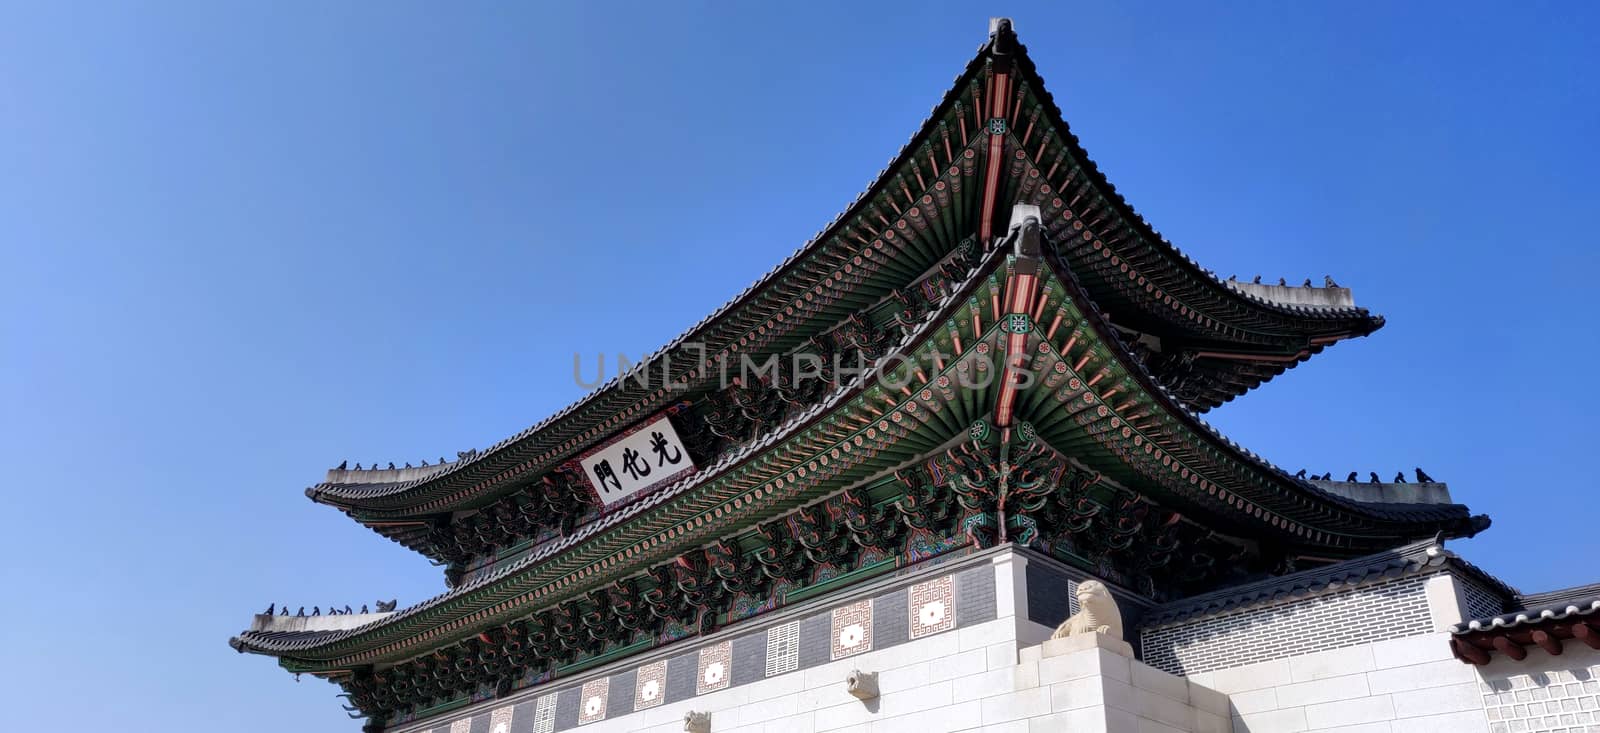 ancient Palace in Seoul, Korea against blue sky by mshivangi92